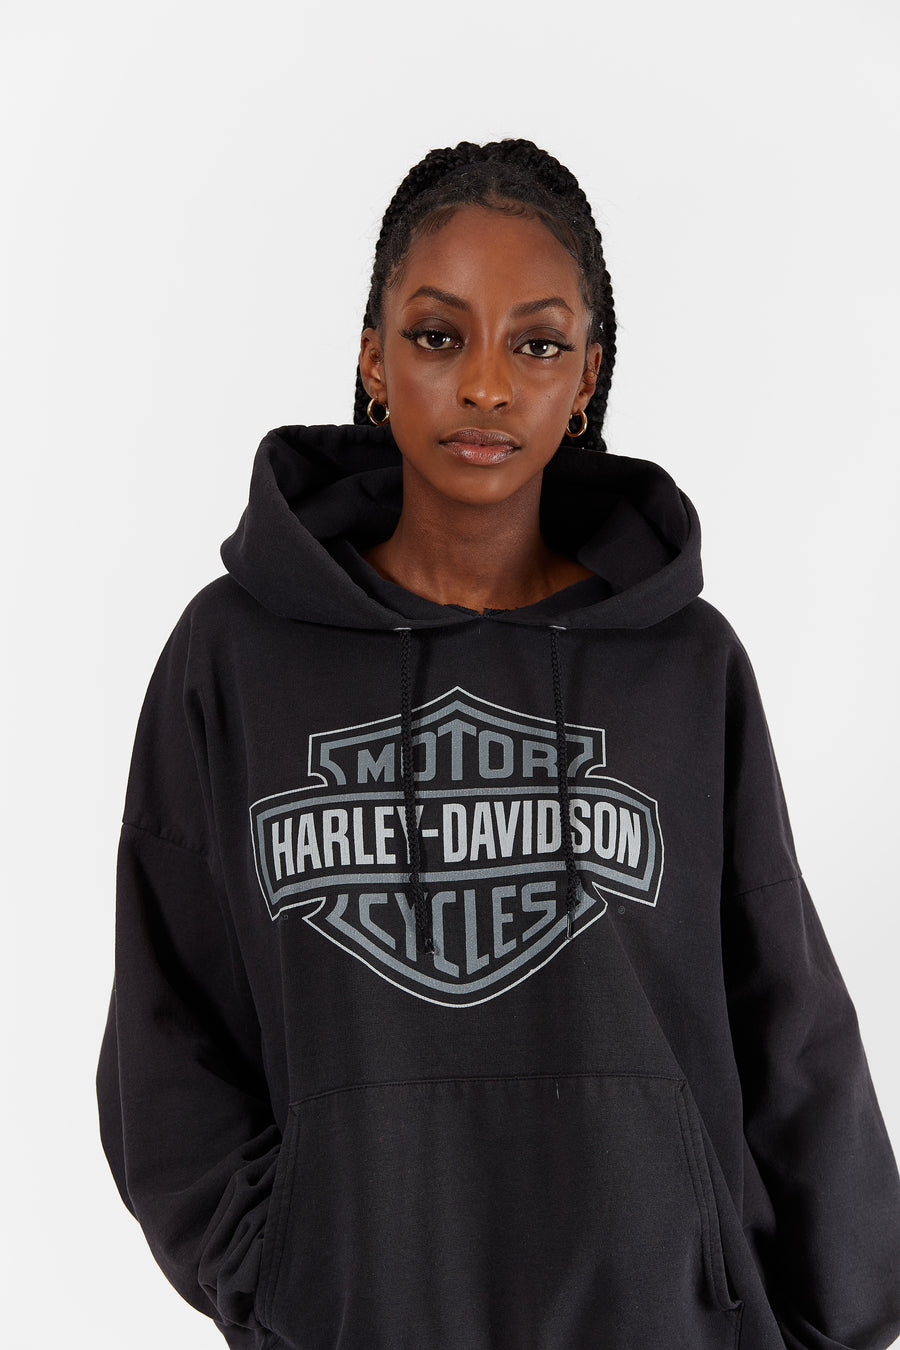 Harley-Davidson Bloomsburg Hoodie in a vintage style from thrift store Twise Studio